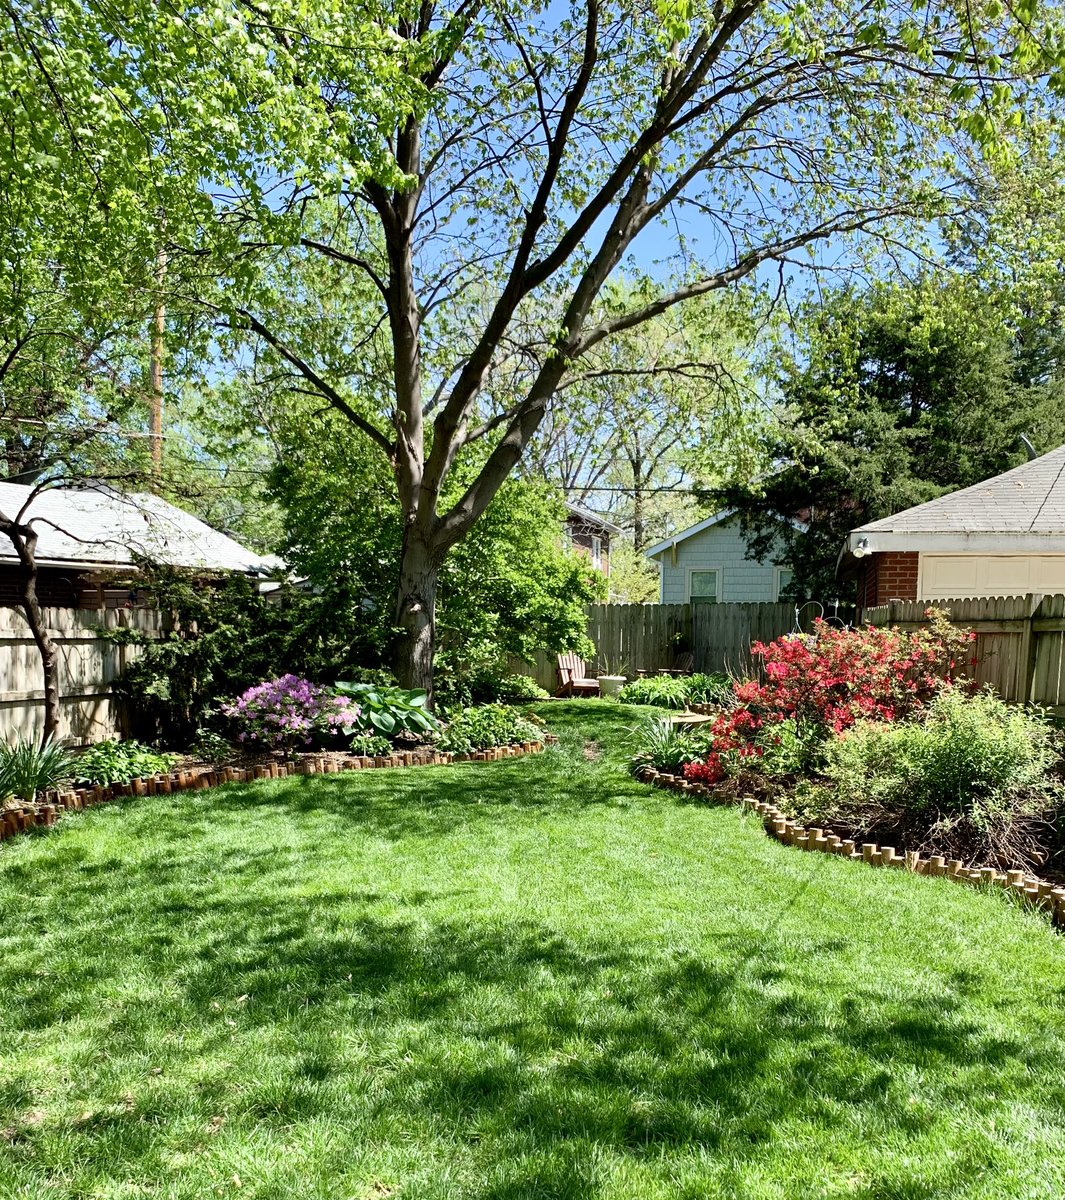 Every summer I work hard to have a beautiful yard. Life in suburbia! But these yards aren’t easy or even natural. I’m tired of the performance and ready for something more low key. #suburbia #greenlawn #grass #Spring2024